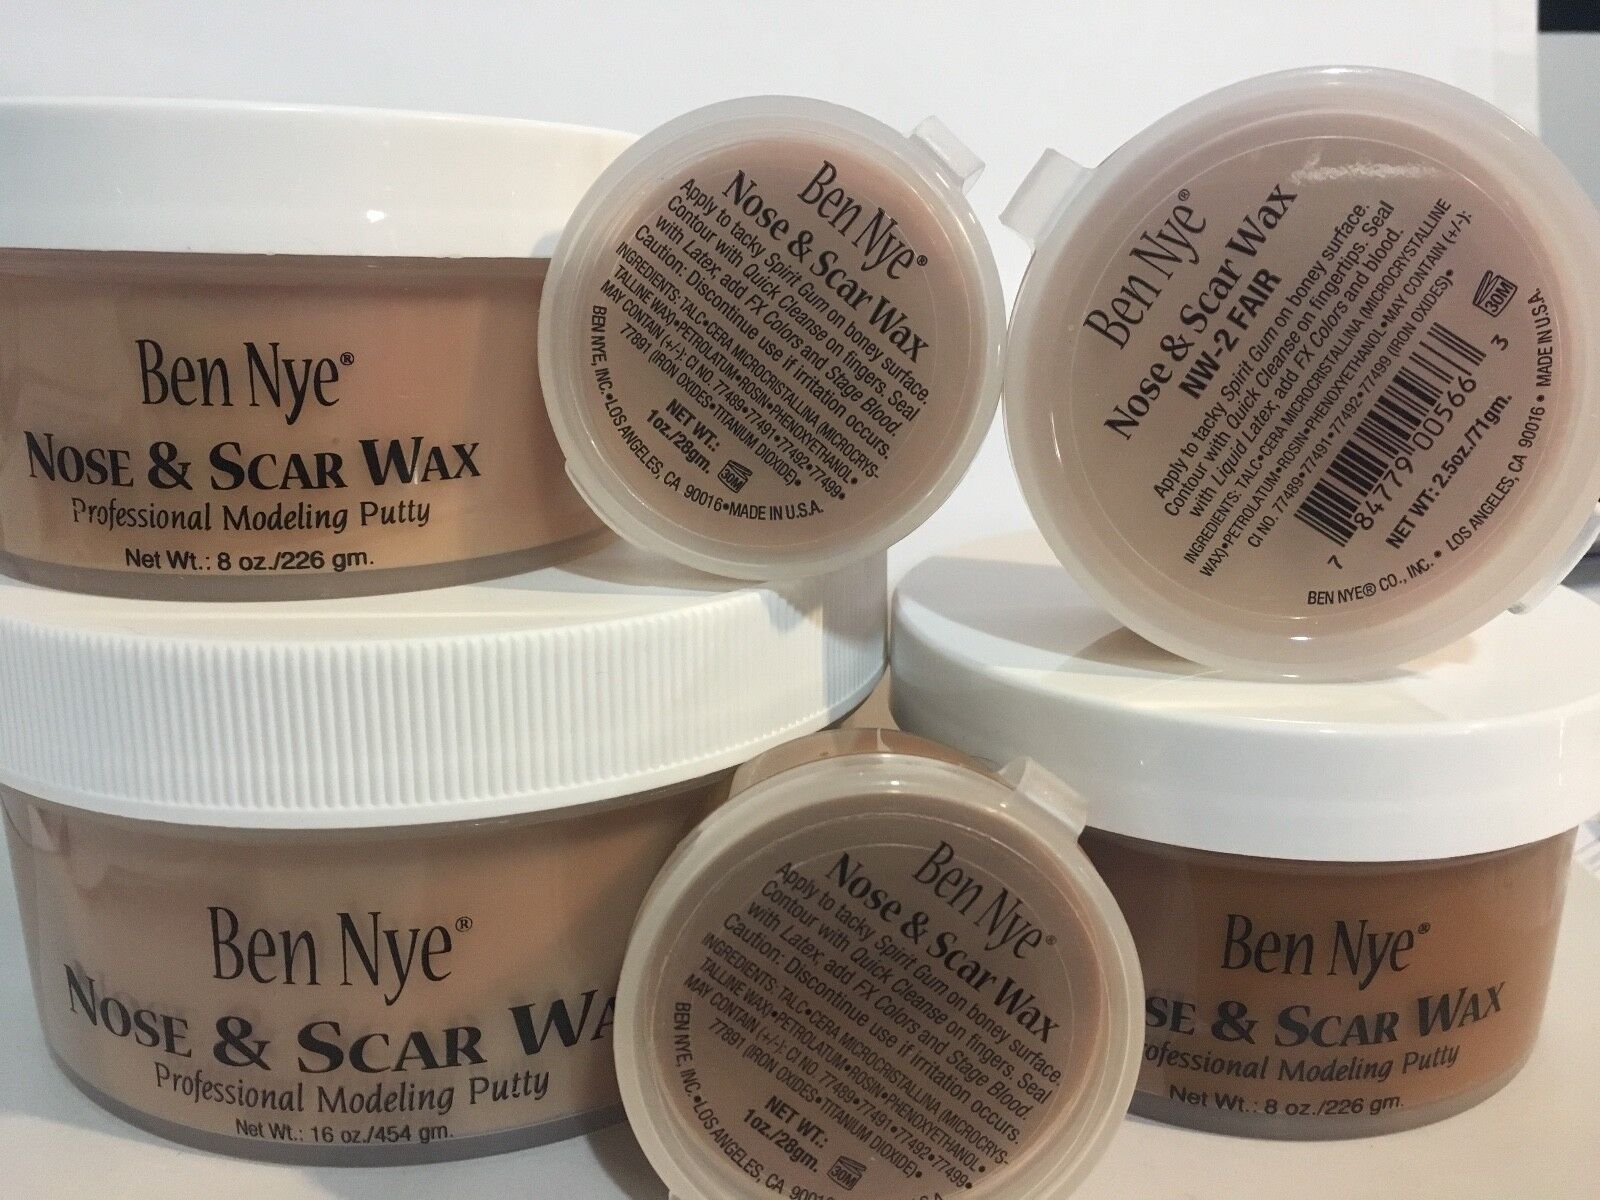 Ben Nye Nose and Scar Wax